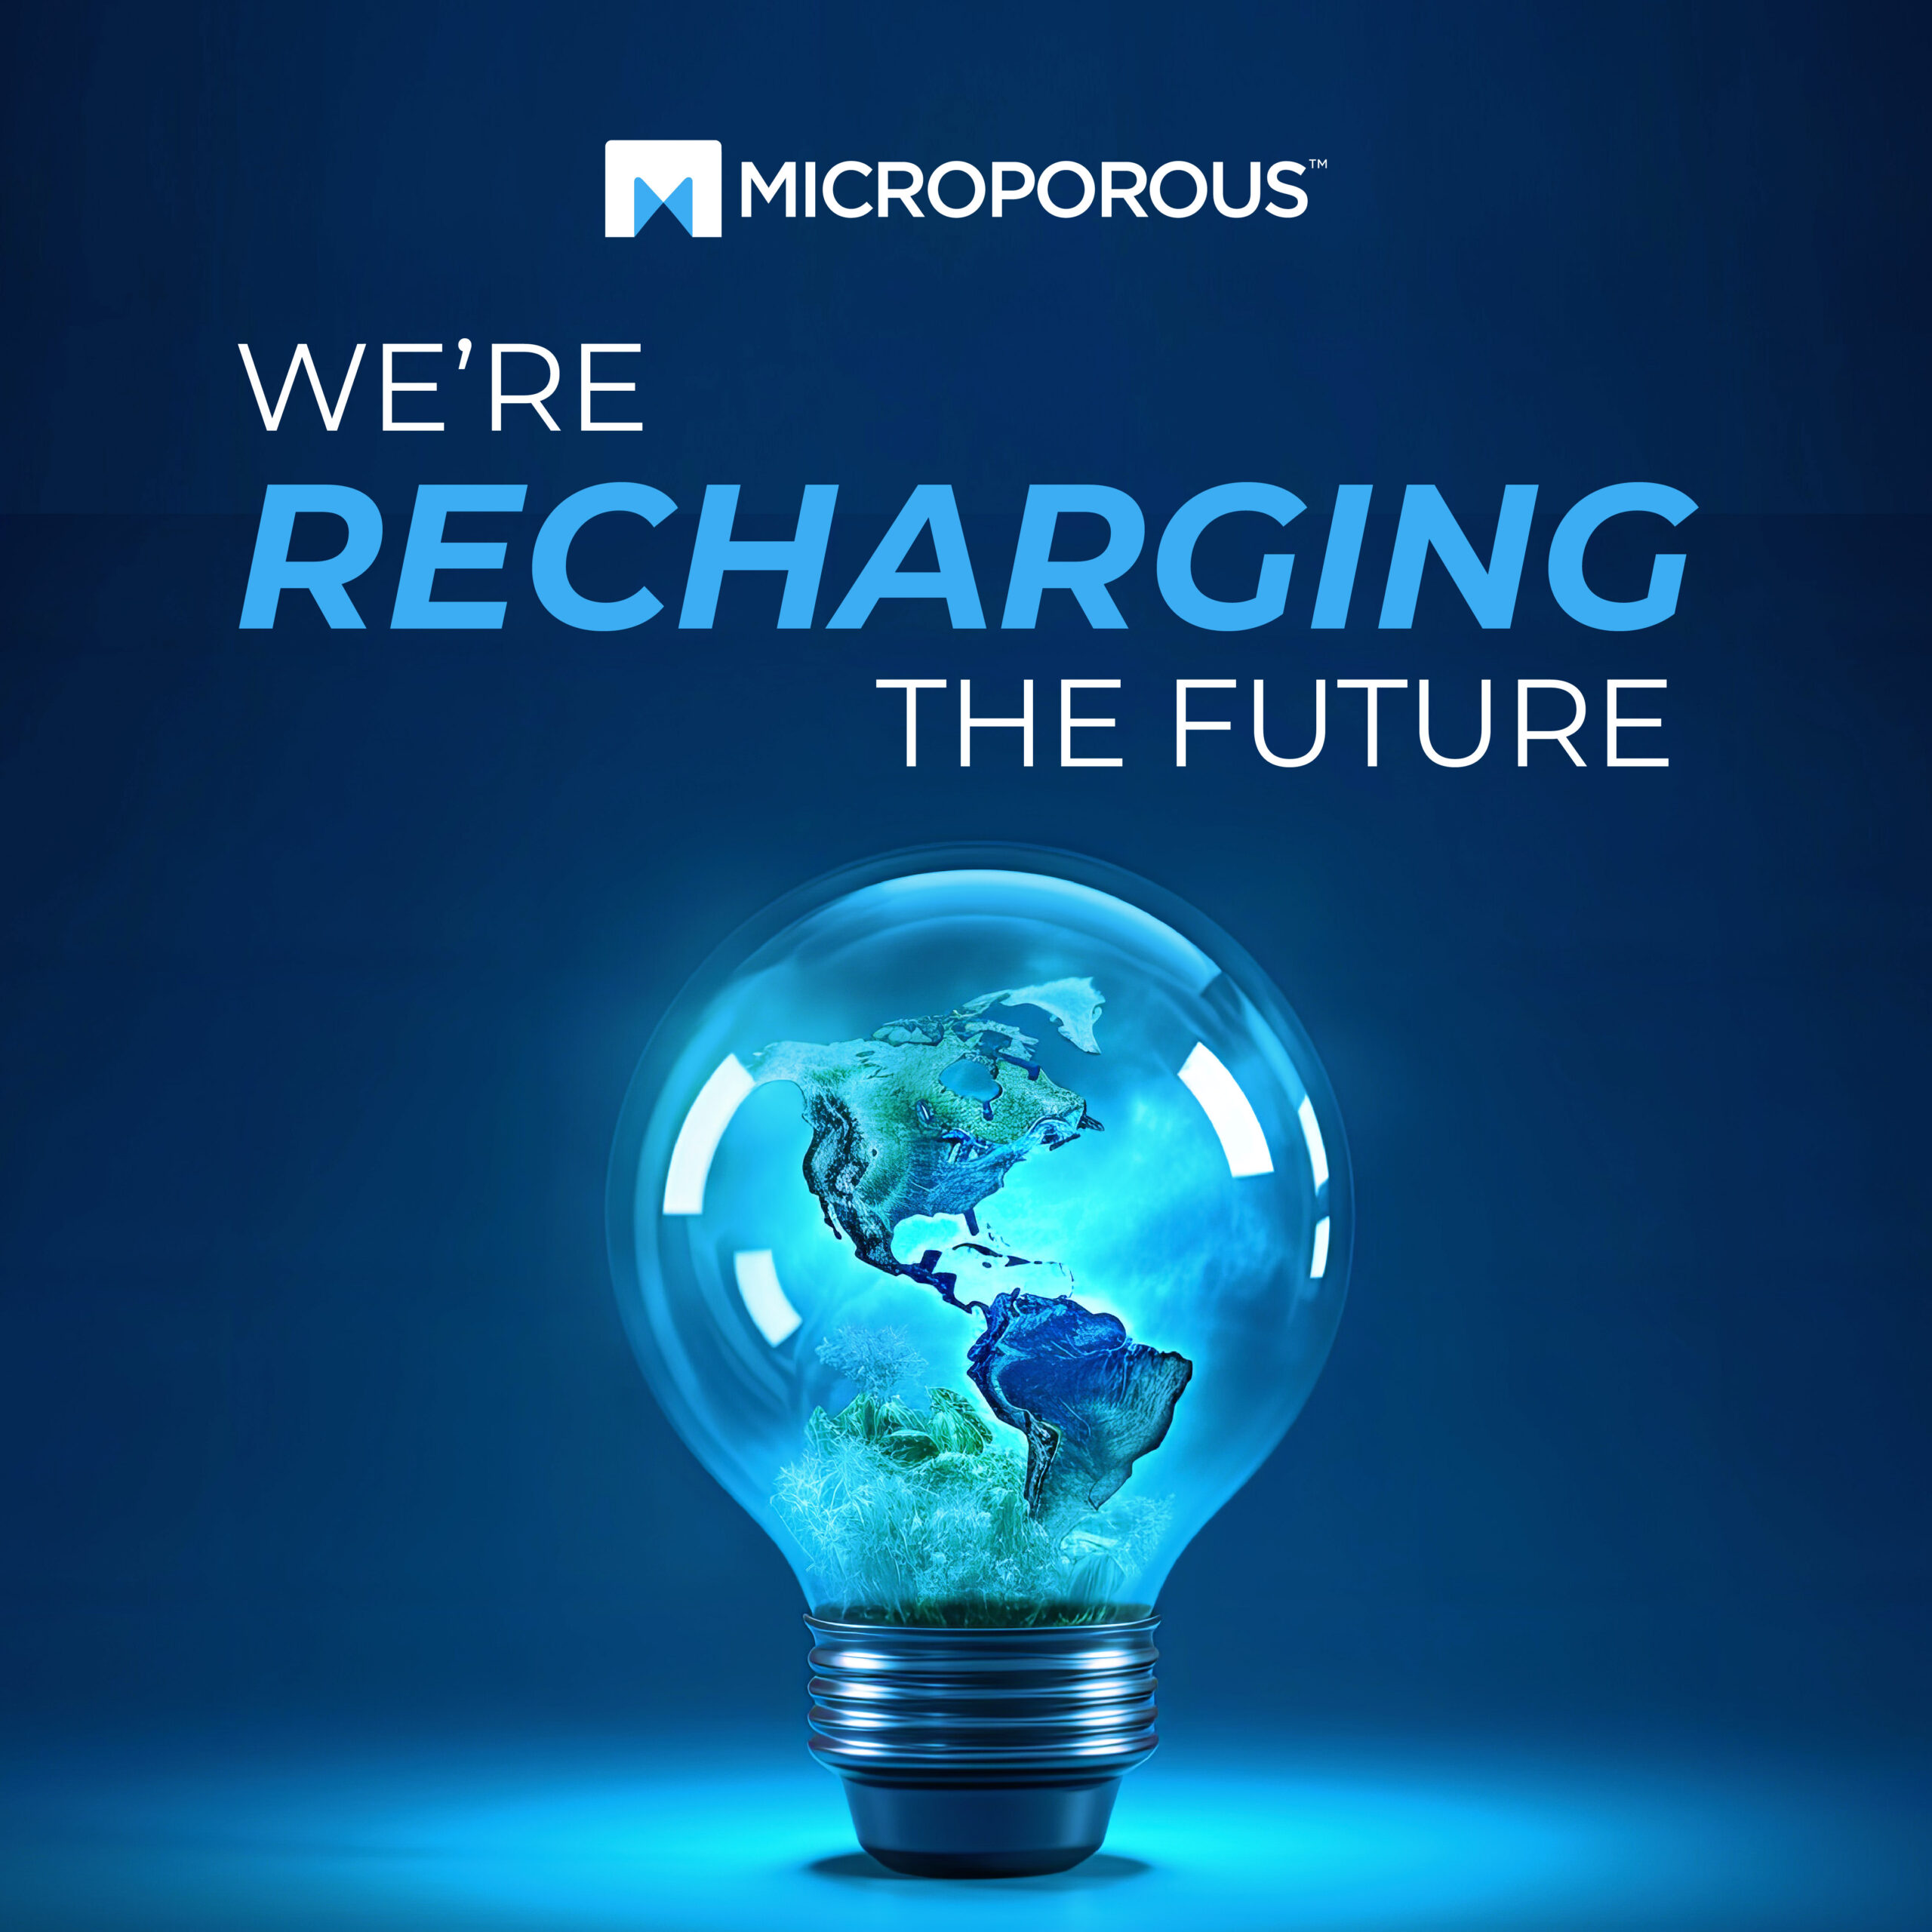 Press Release: Microporous (MP Assets Corporation) Selected to negotiate $100 Million Grant from the U.S. Department of Energy Grant to propel clean energy manufacturing